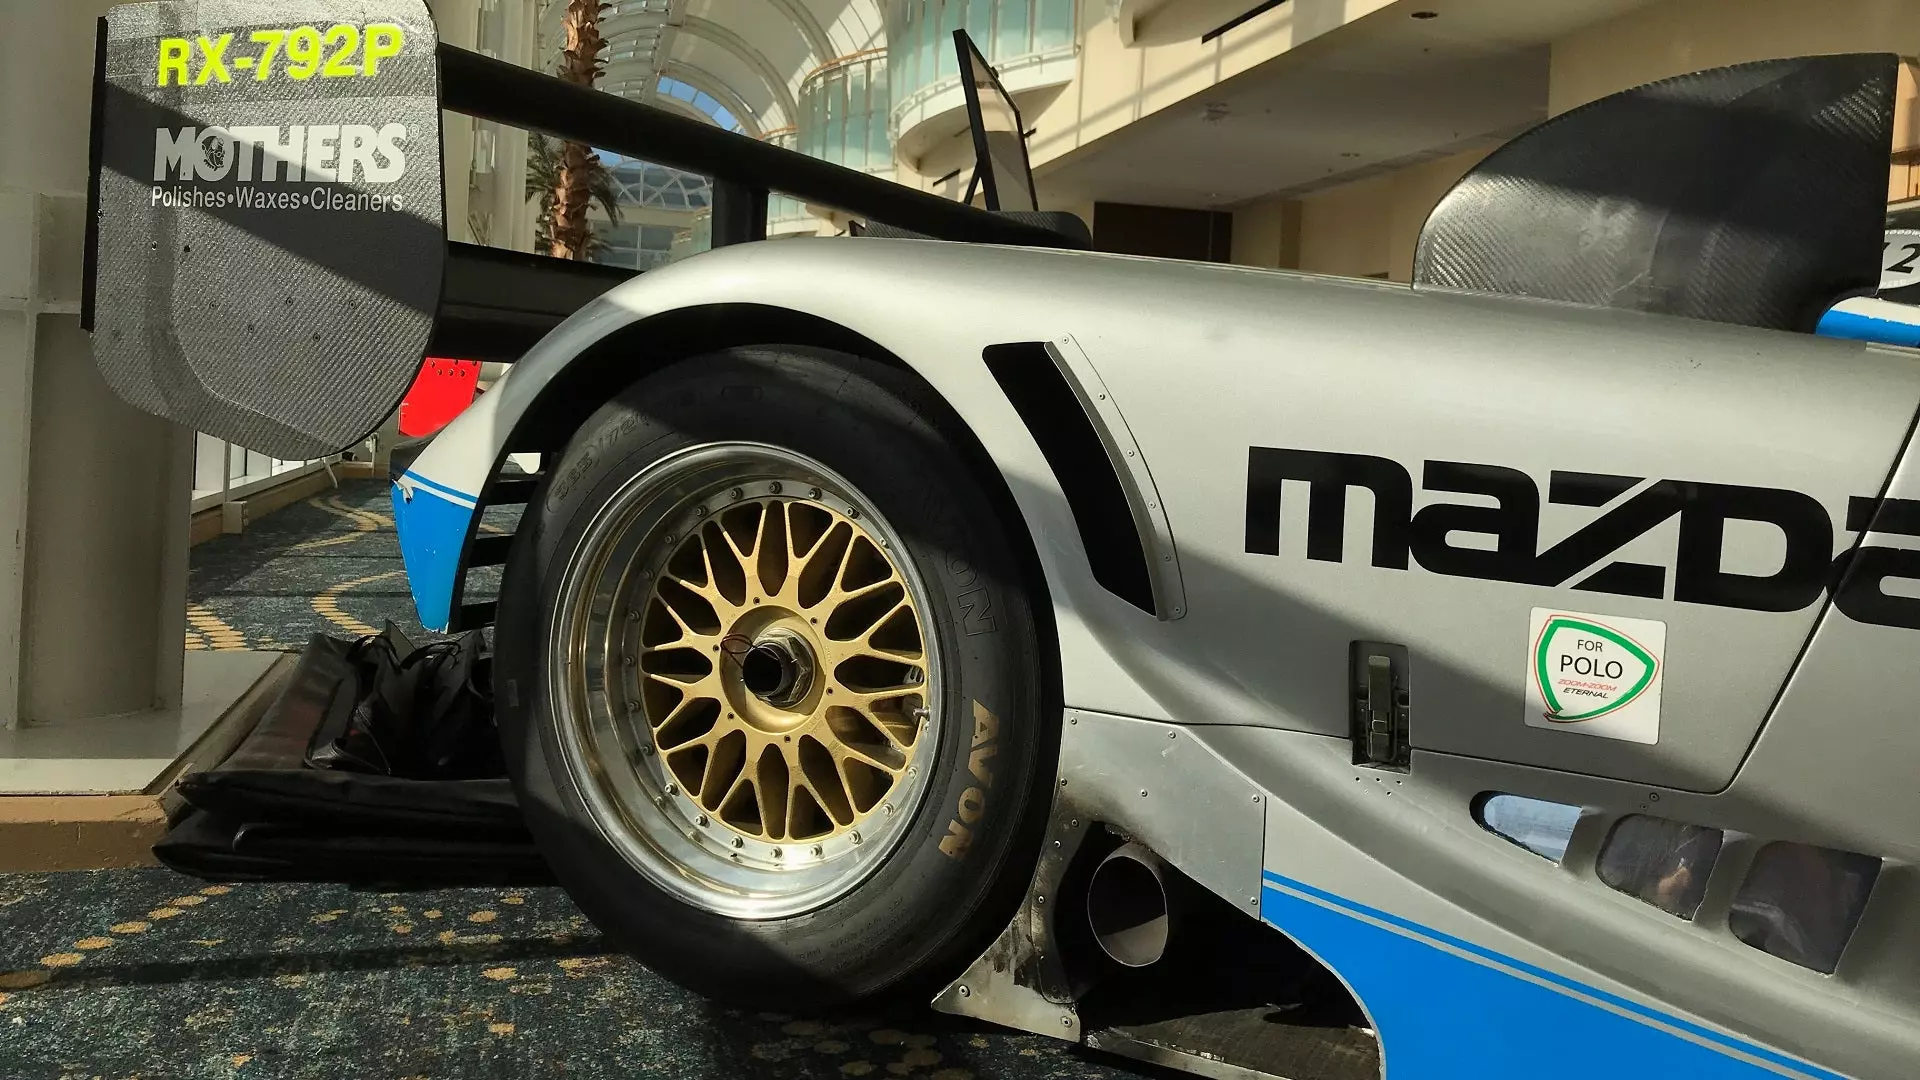 I Found a Legendary Rotary Race Car Parked in a Convention Center | Autance